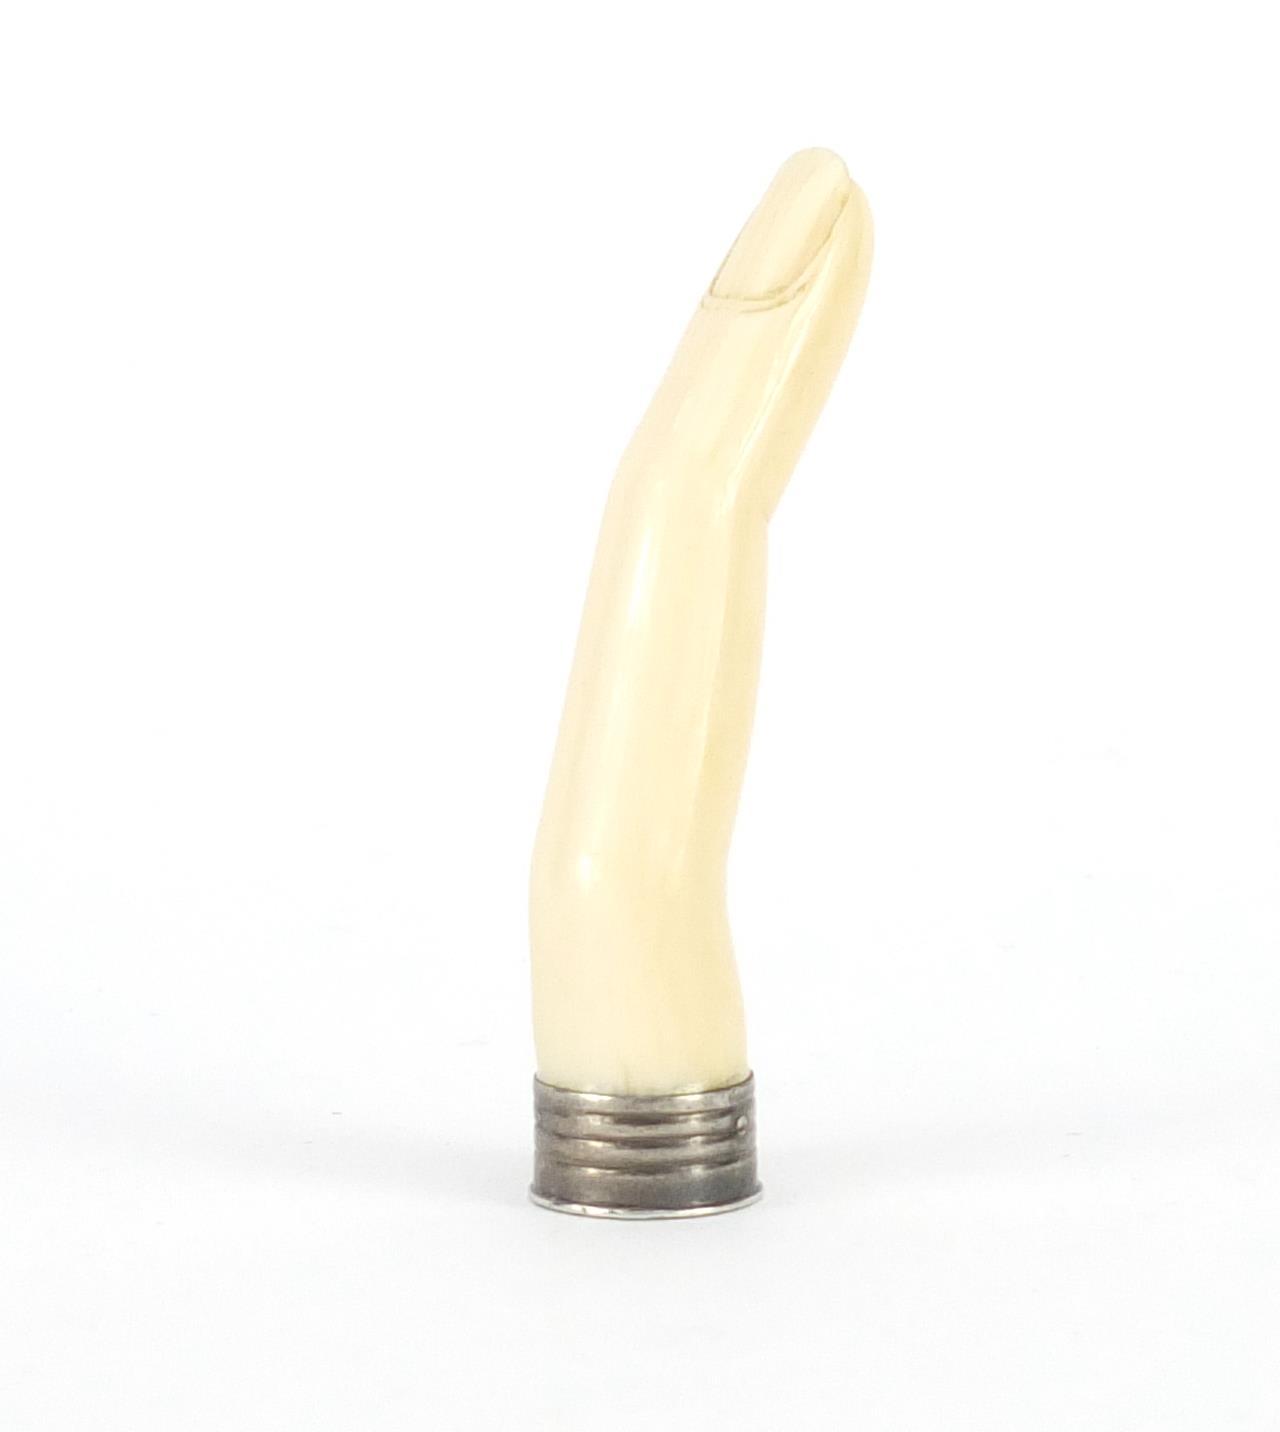 Good 19th century carved ivory pipe tamper in the form of a ladies finger, 6.5cm in length :For